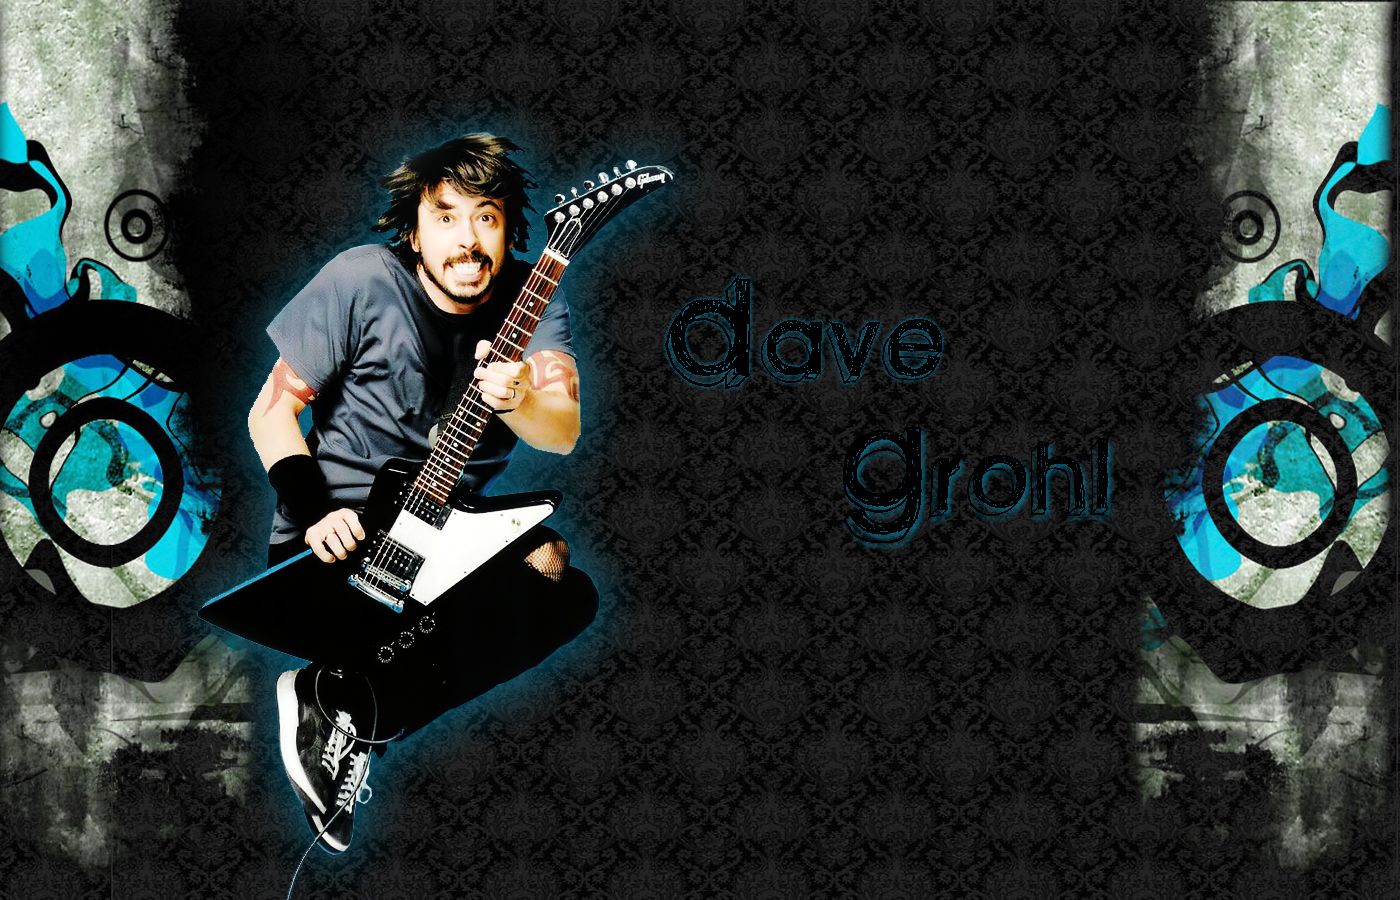 Dave Grohl Wall By Humbug99